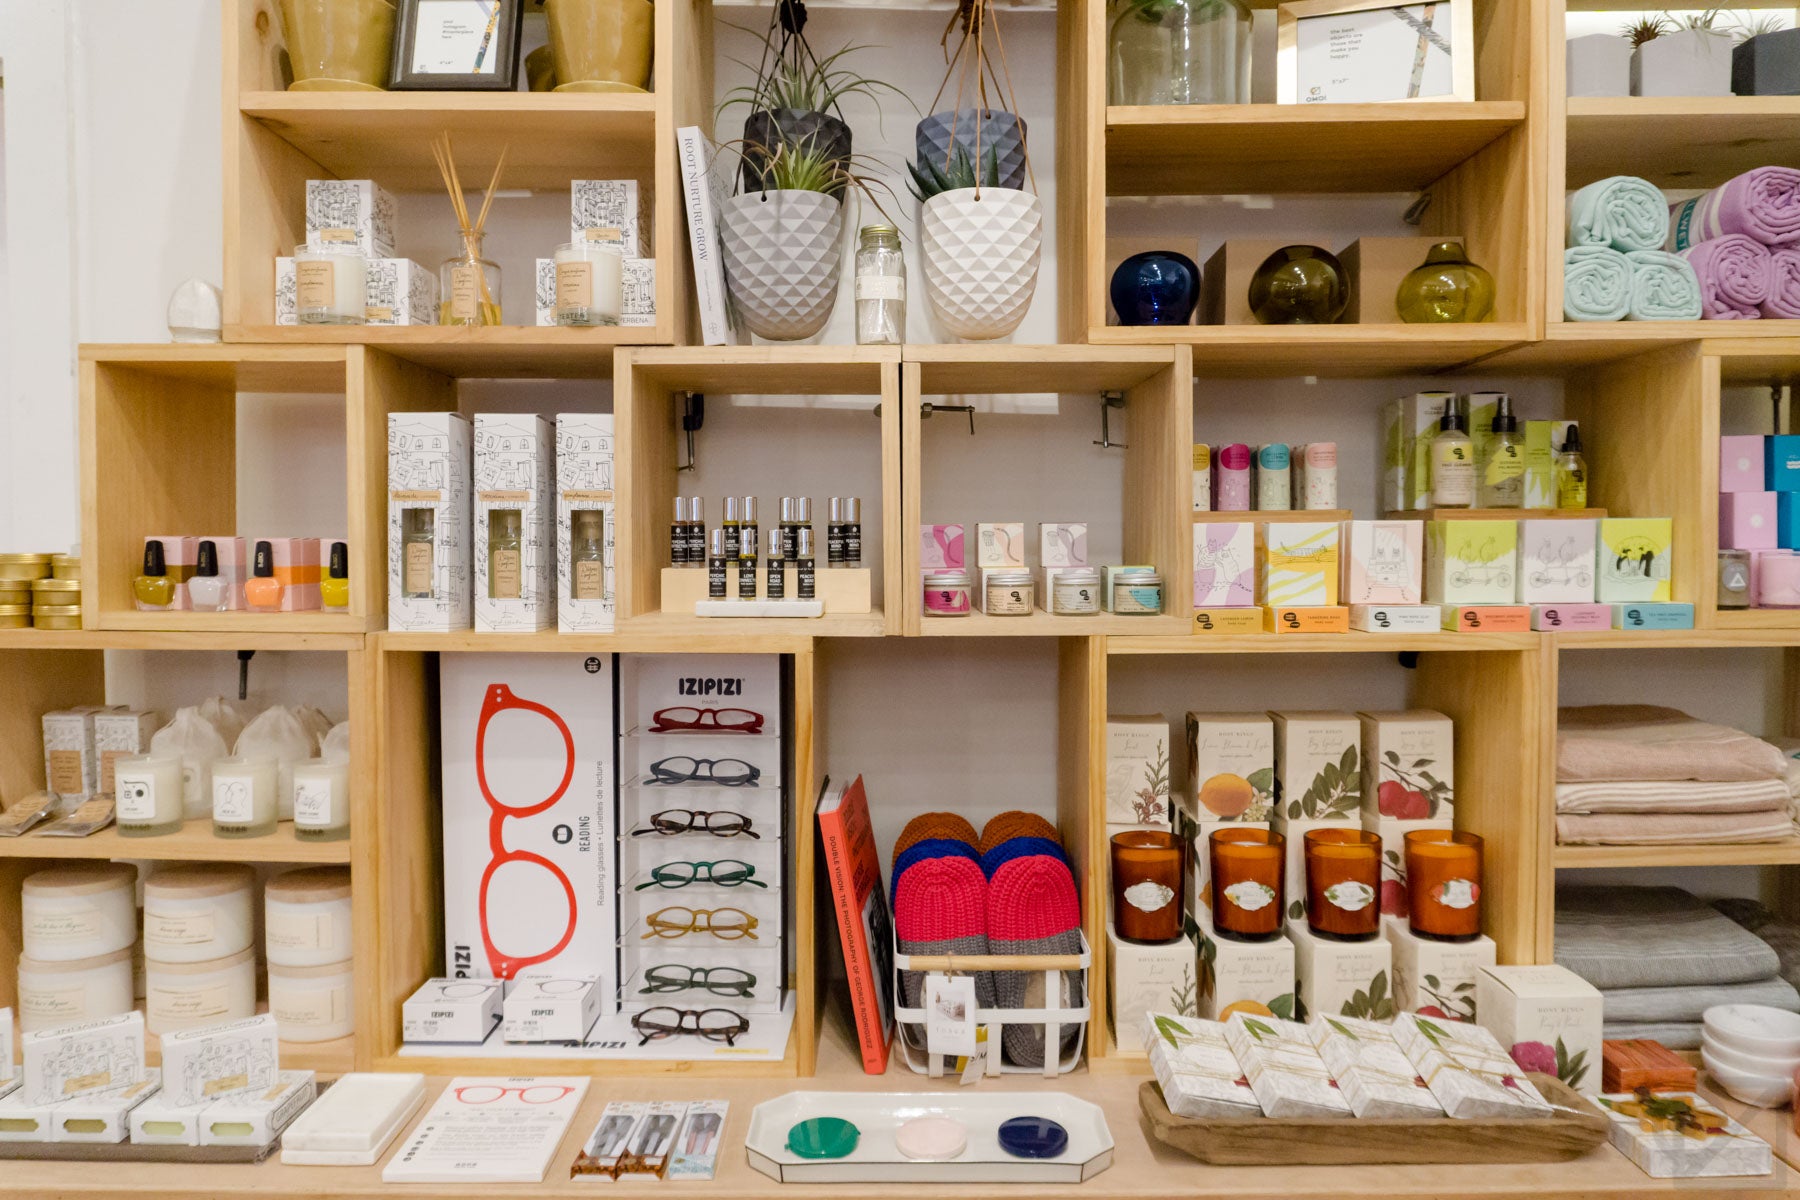 A look at the apothecary and homewares department